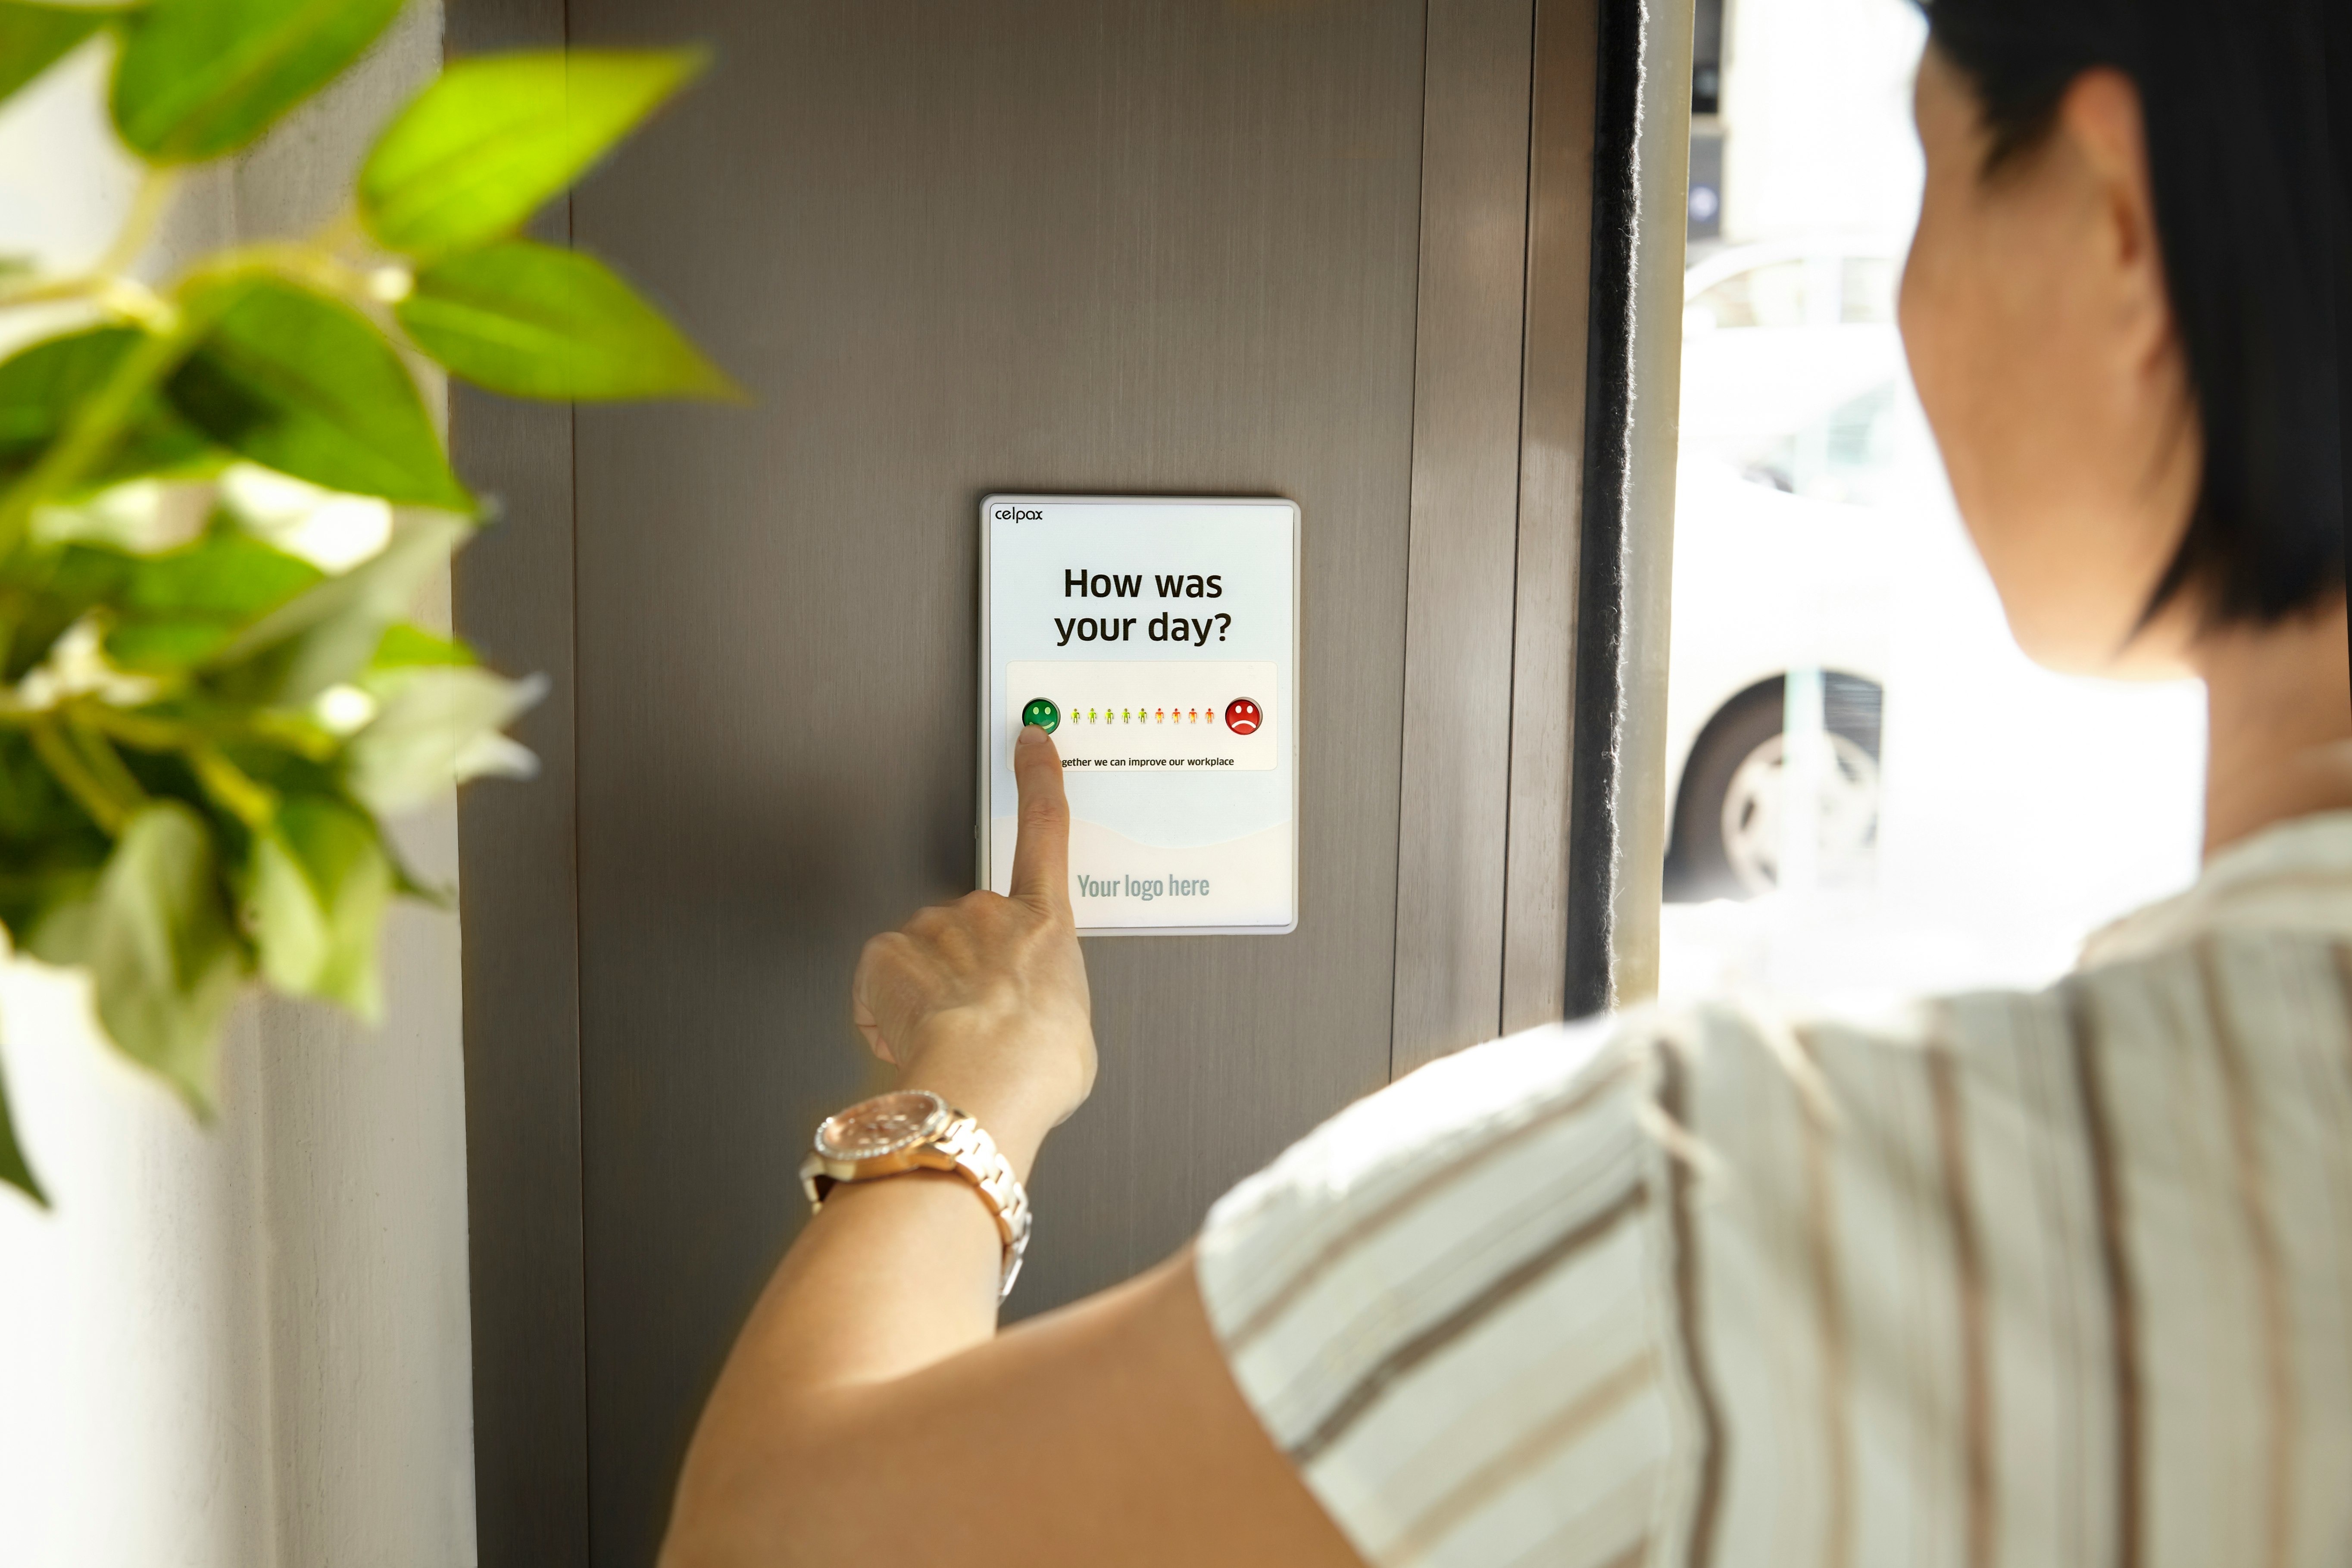 Female employee pressing a green button to give feedback on a device at the company exit door